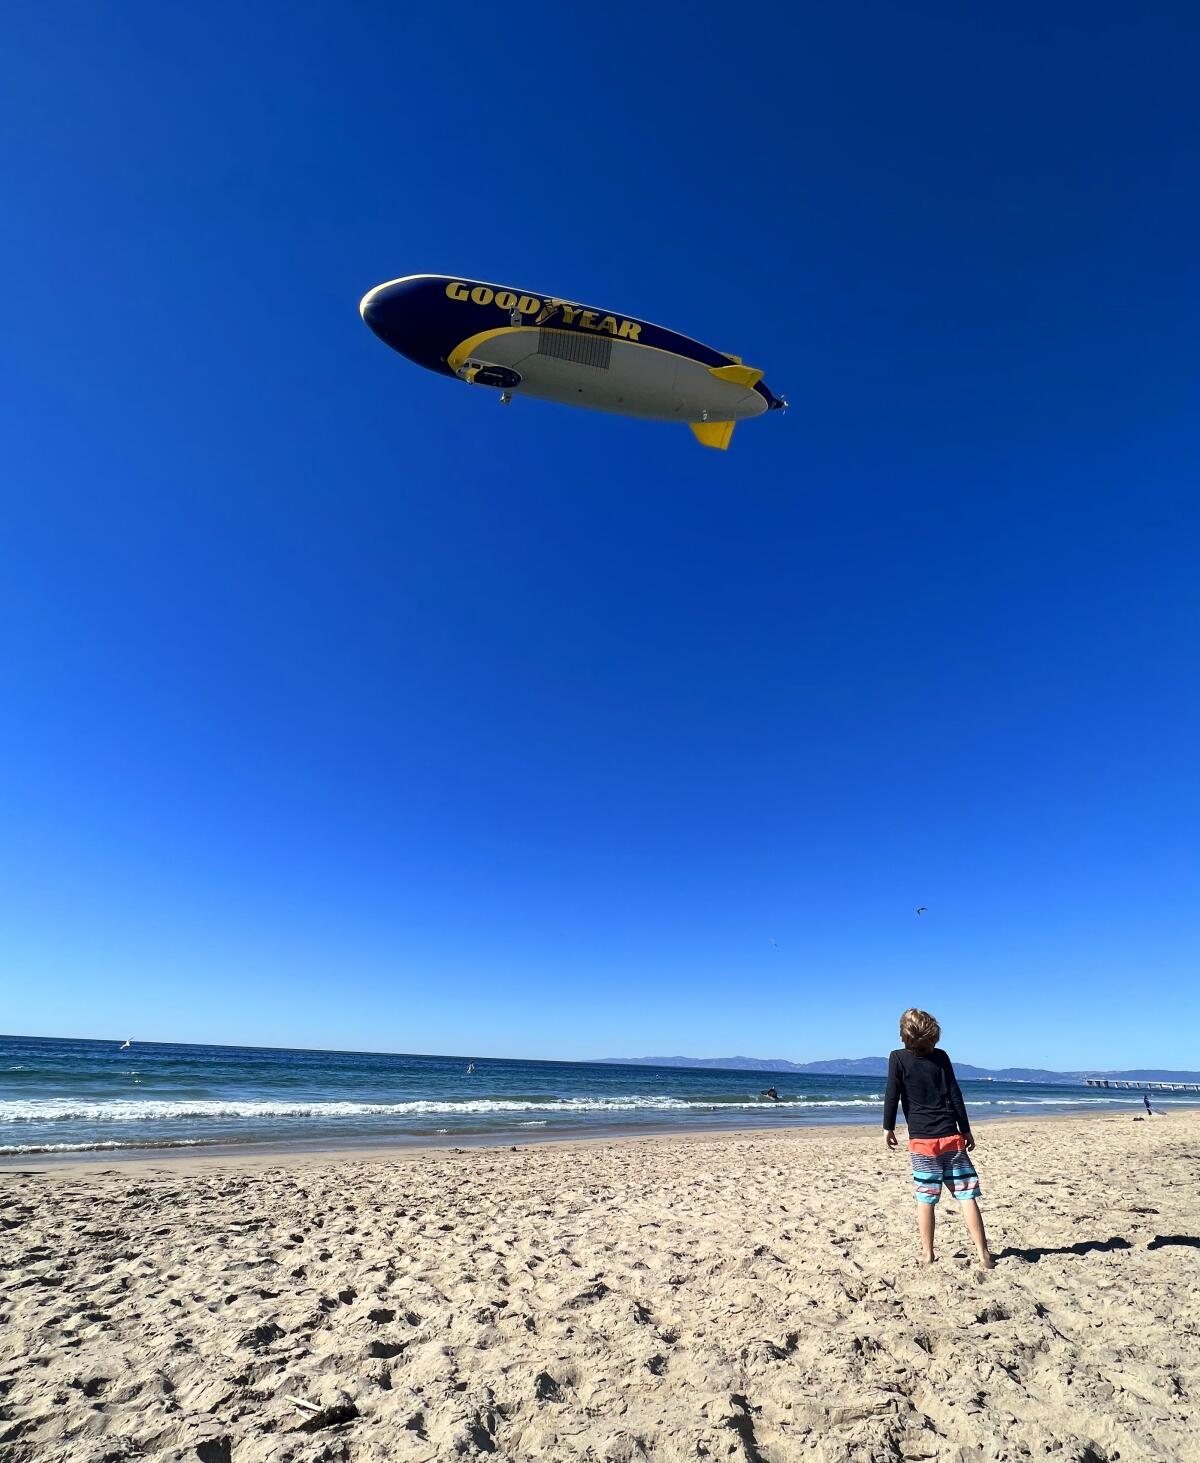 A boy stands on a beach and looks up at a large blimp flying overhead.